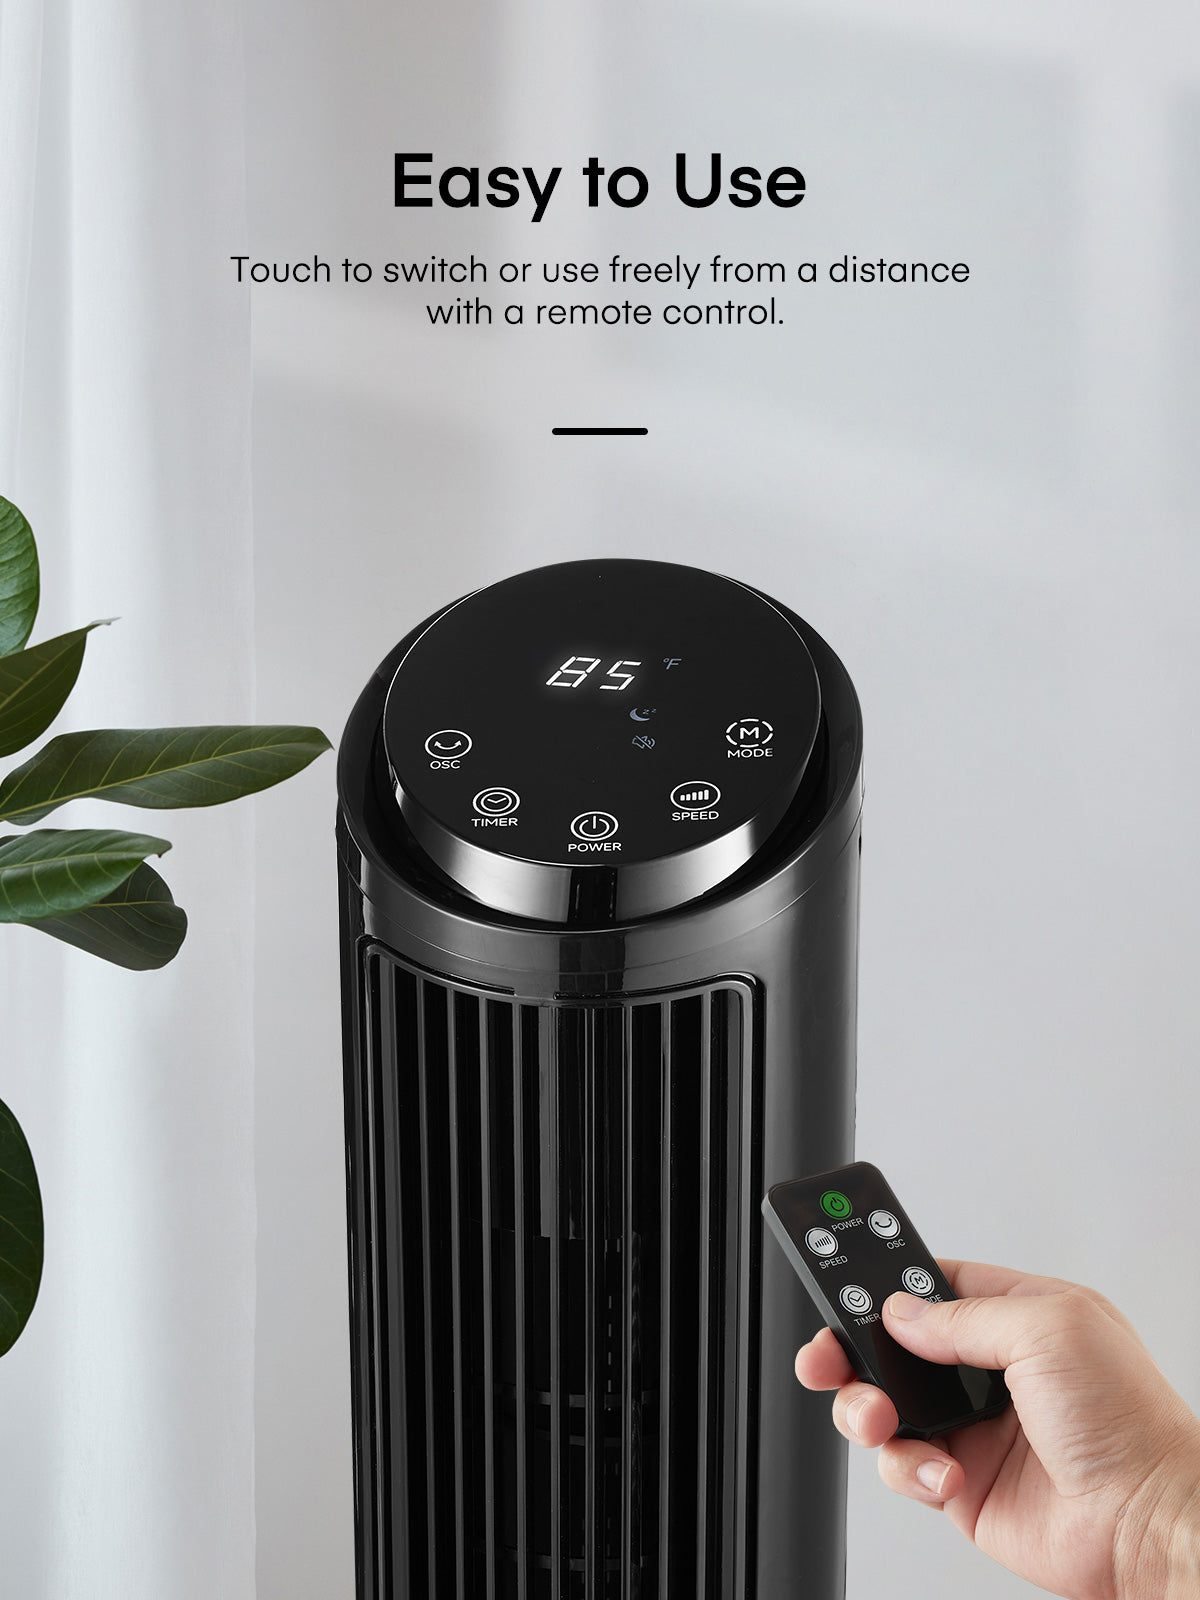 FOHERE Tower Fan for Home, 40" Oscillating Quiet DC Motor Cooling Fan with Remote Control, 12 Speeds, 4 Modes and Timer, Standing Floor Fans Safe for Bedroom and Home Office Use, Black